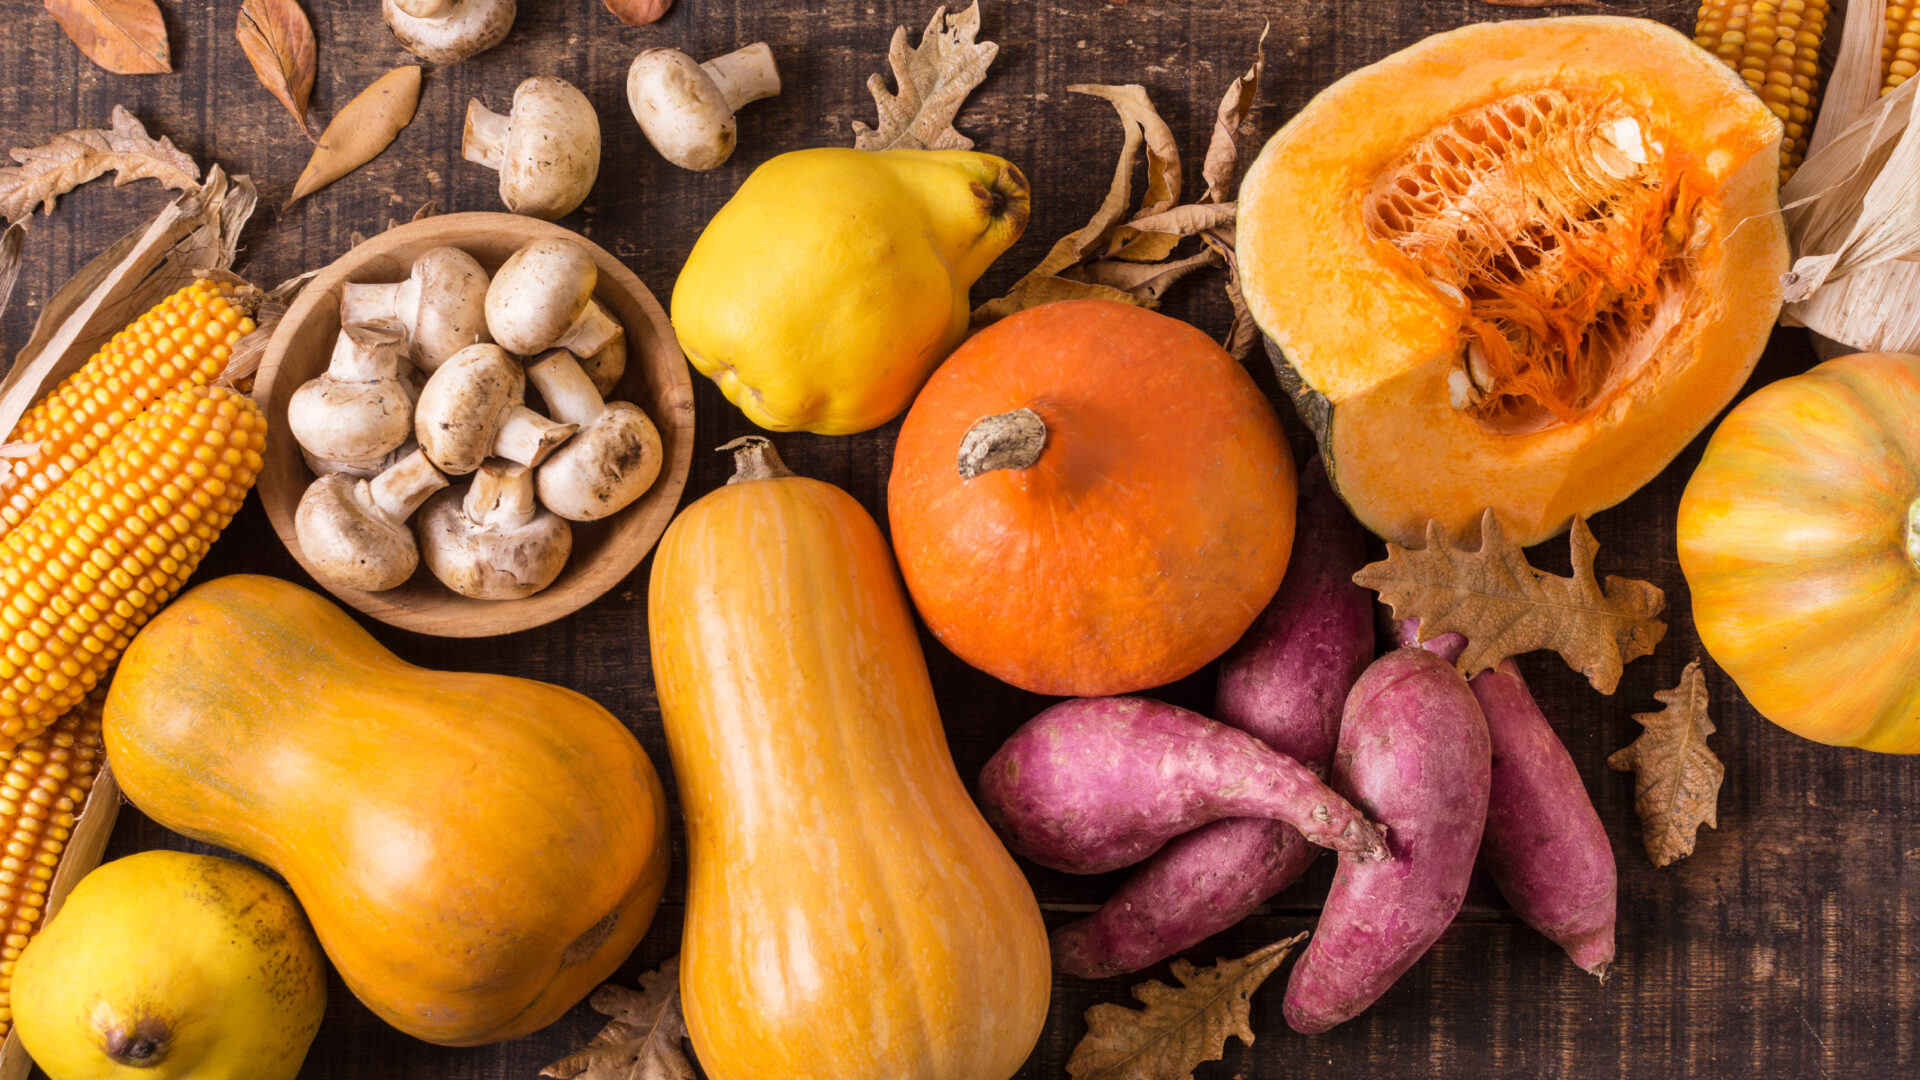 image of vegetables from the fall season such as pumpkins, corns, sweet potatoes and squash, nicely layout on top of wooden table with fallen leaves and mushrooms